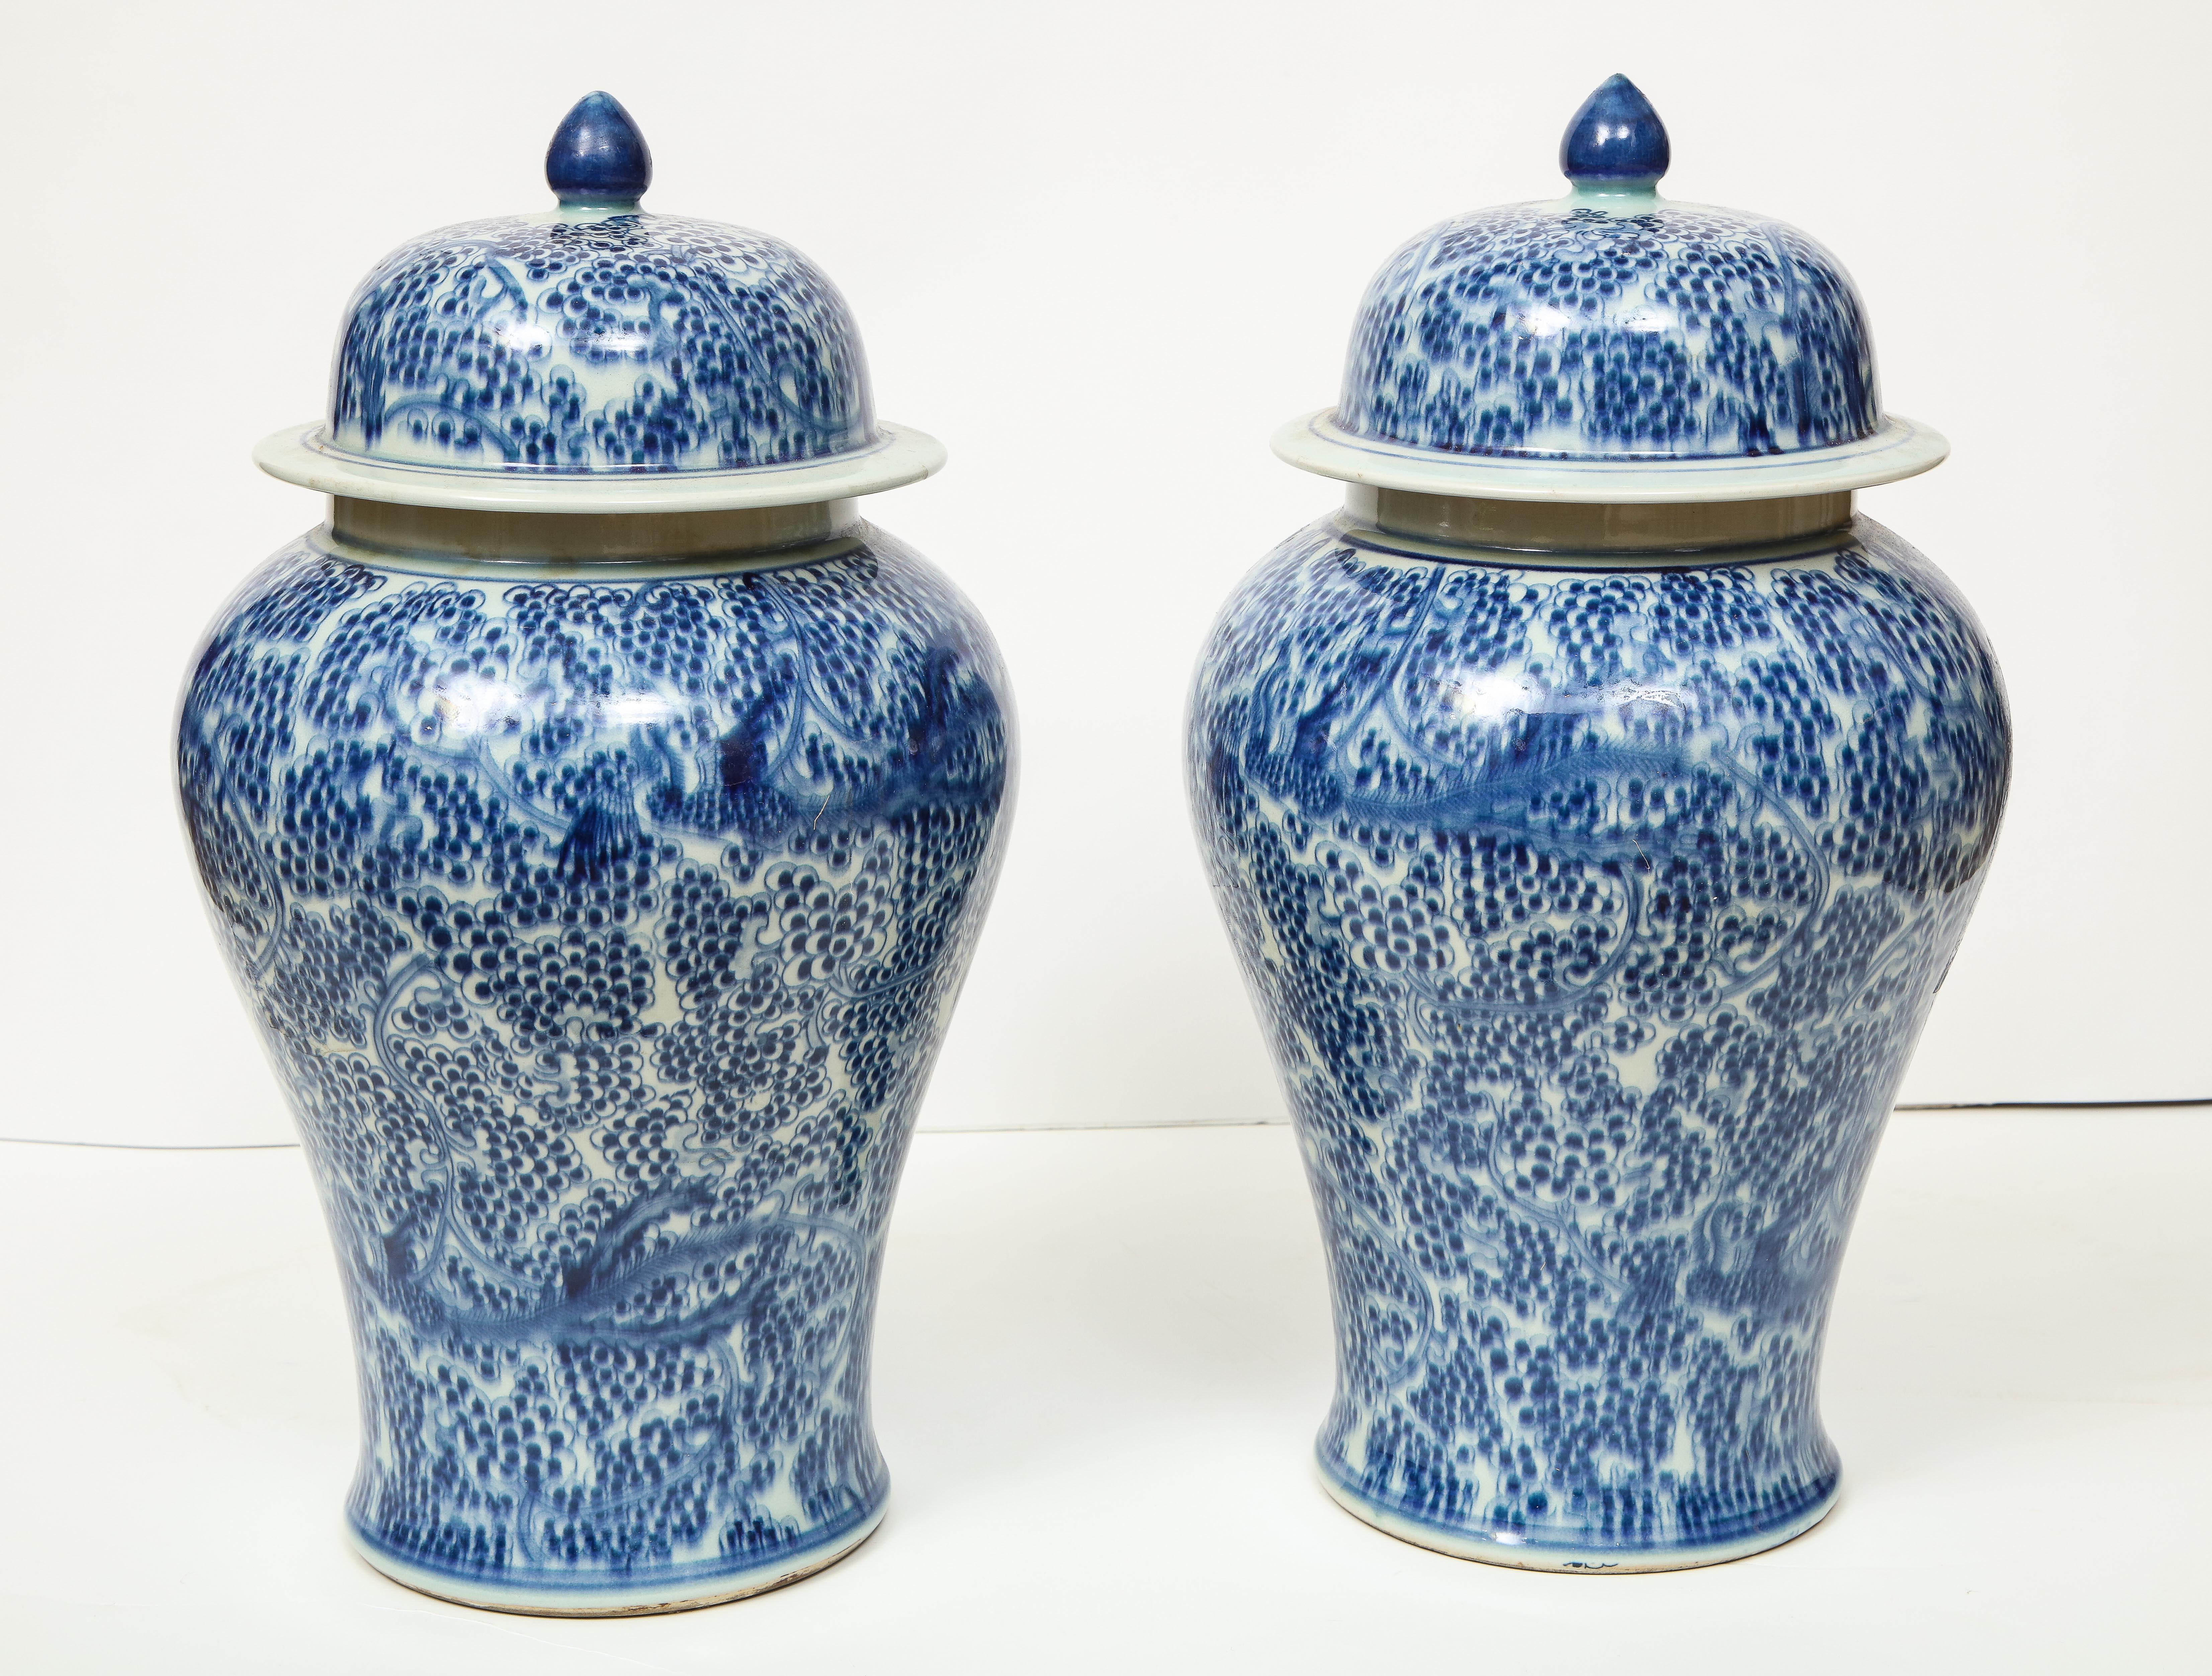 Porcelain Pair of Chinese Blue and White Jars with Lids